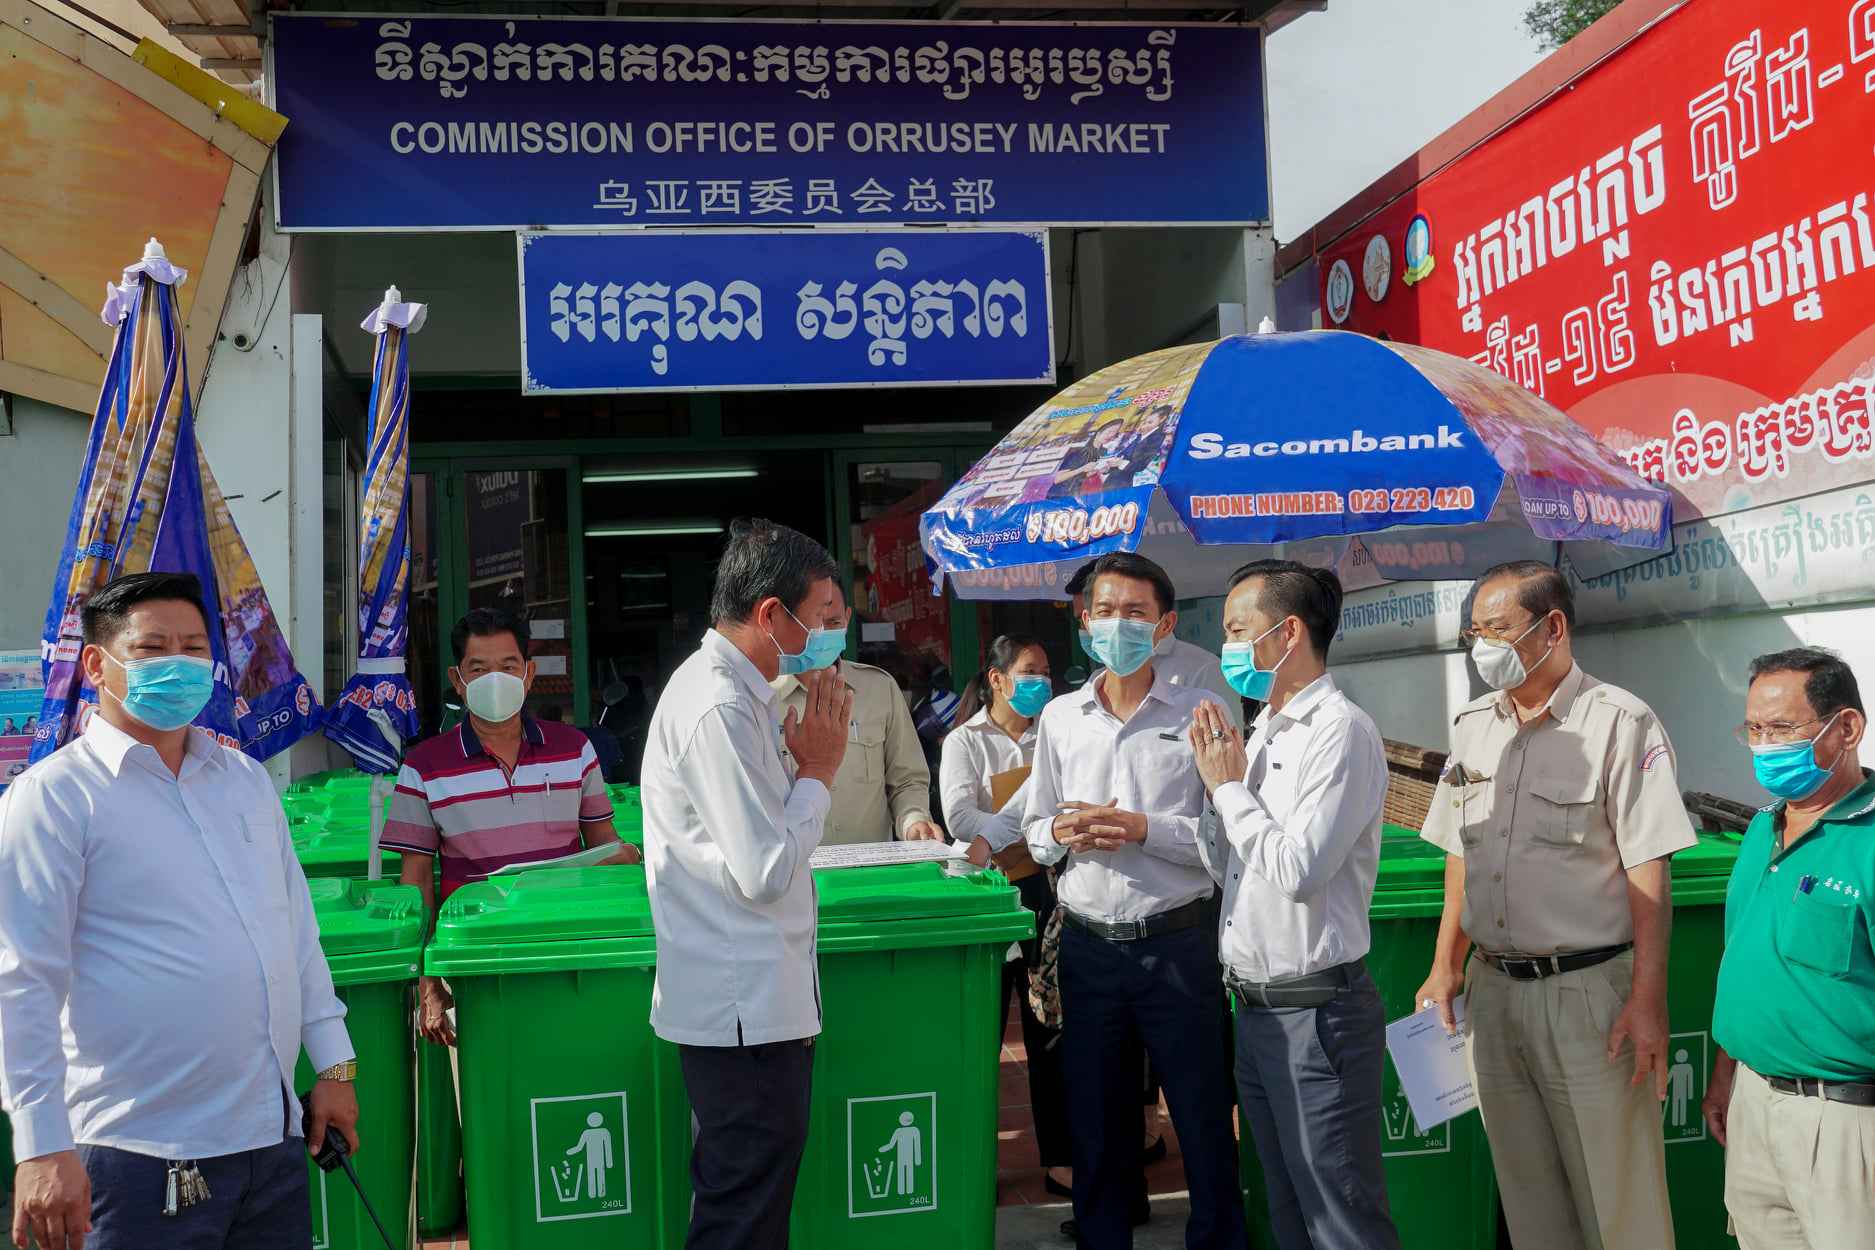 Sacombank Cambodia sponsored umbrellas and dustbins to Orussey Market Commission